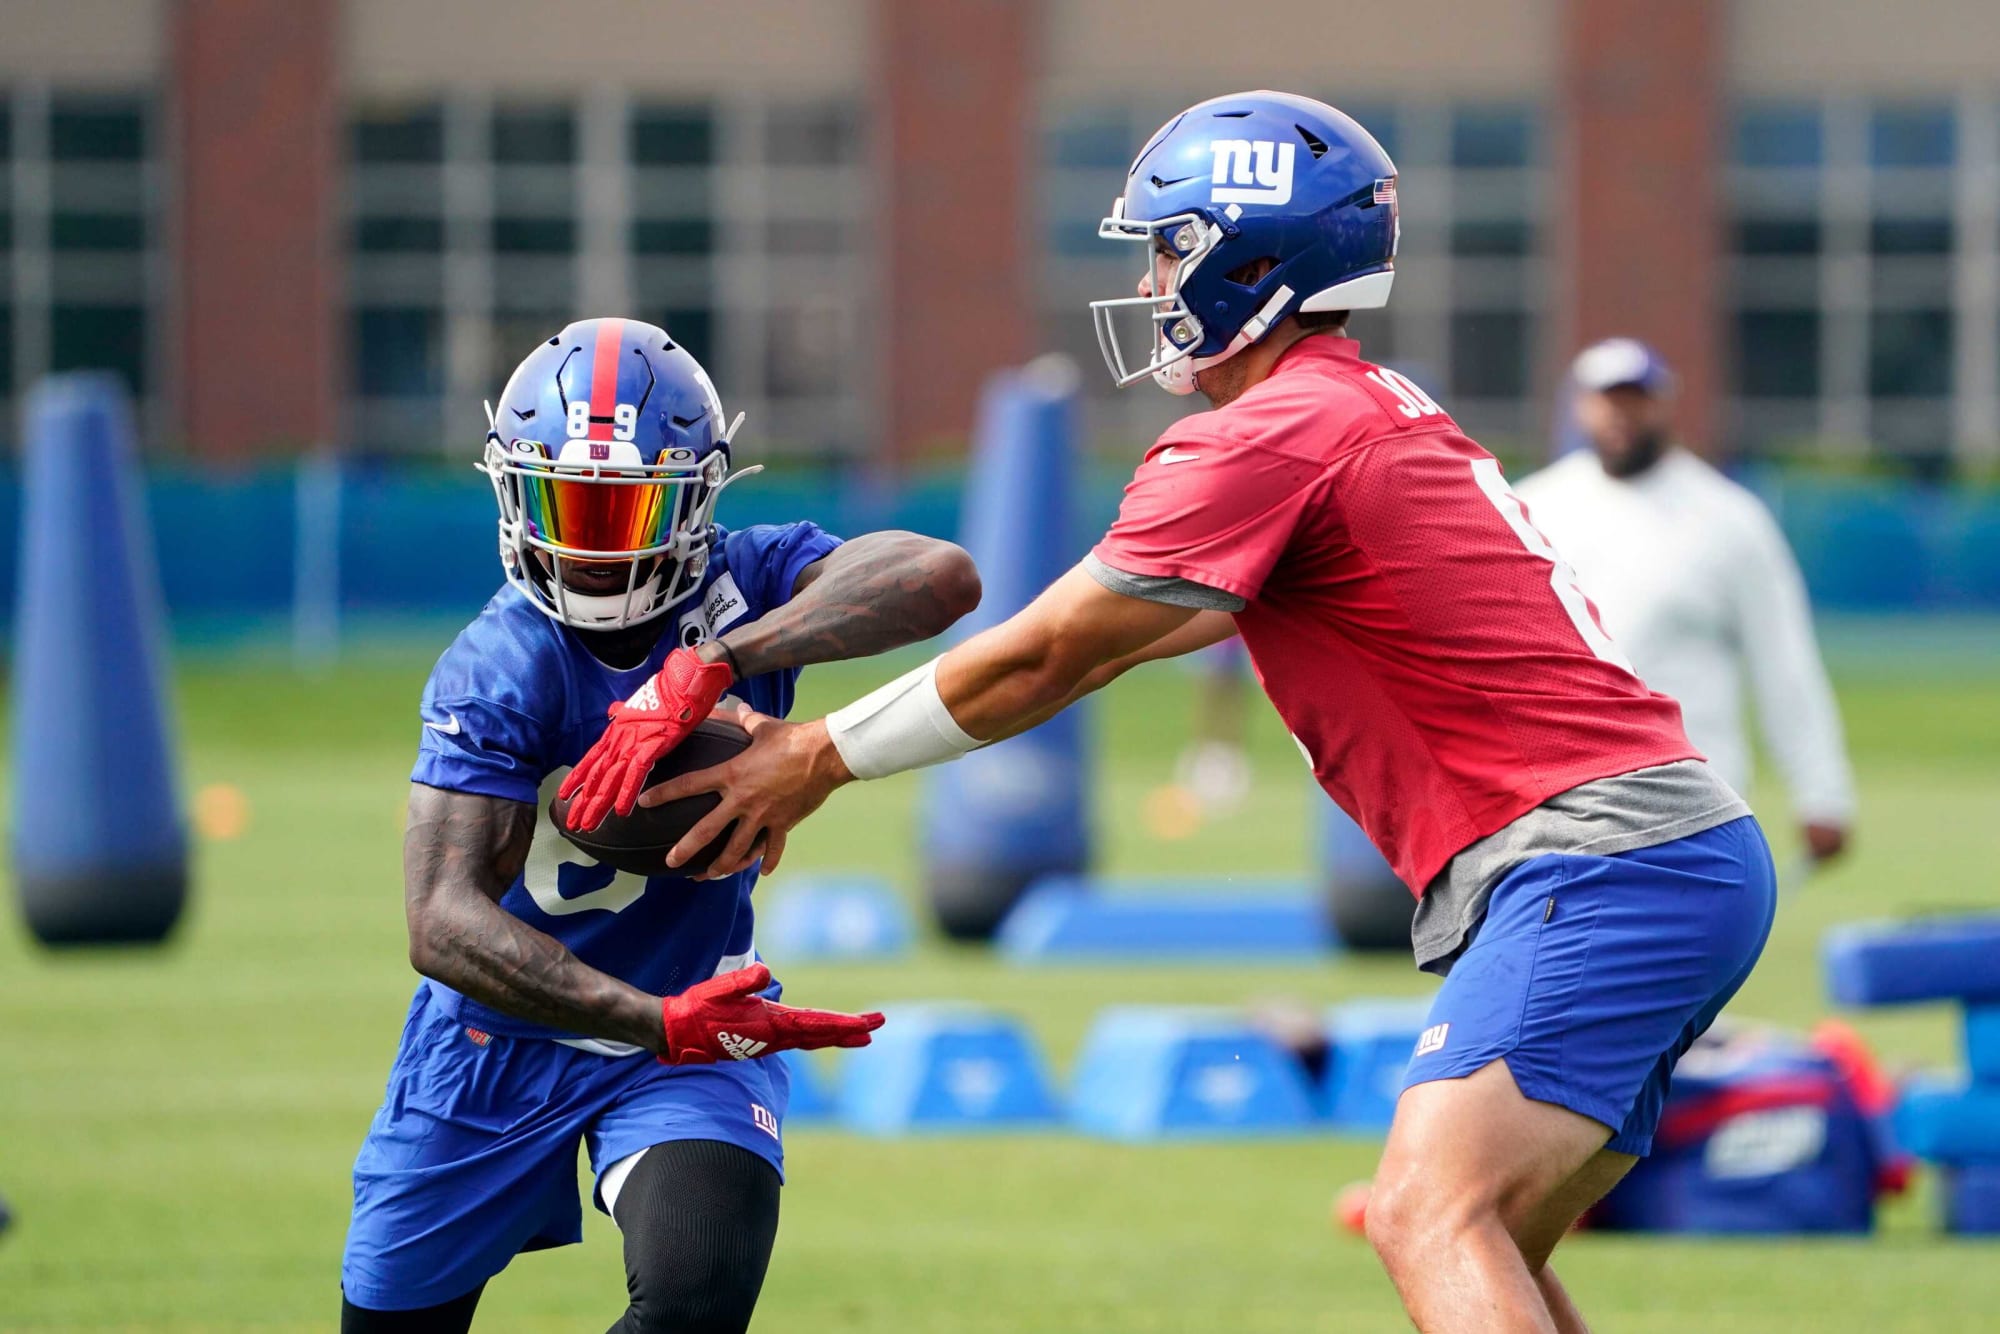 8 plays from camp that NY Giants fans should still be talking about